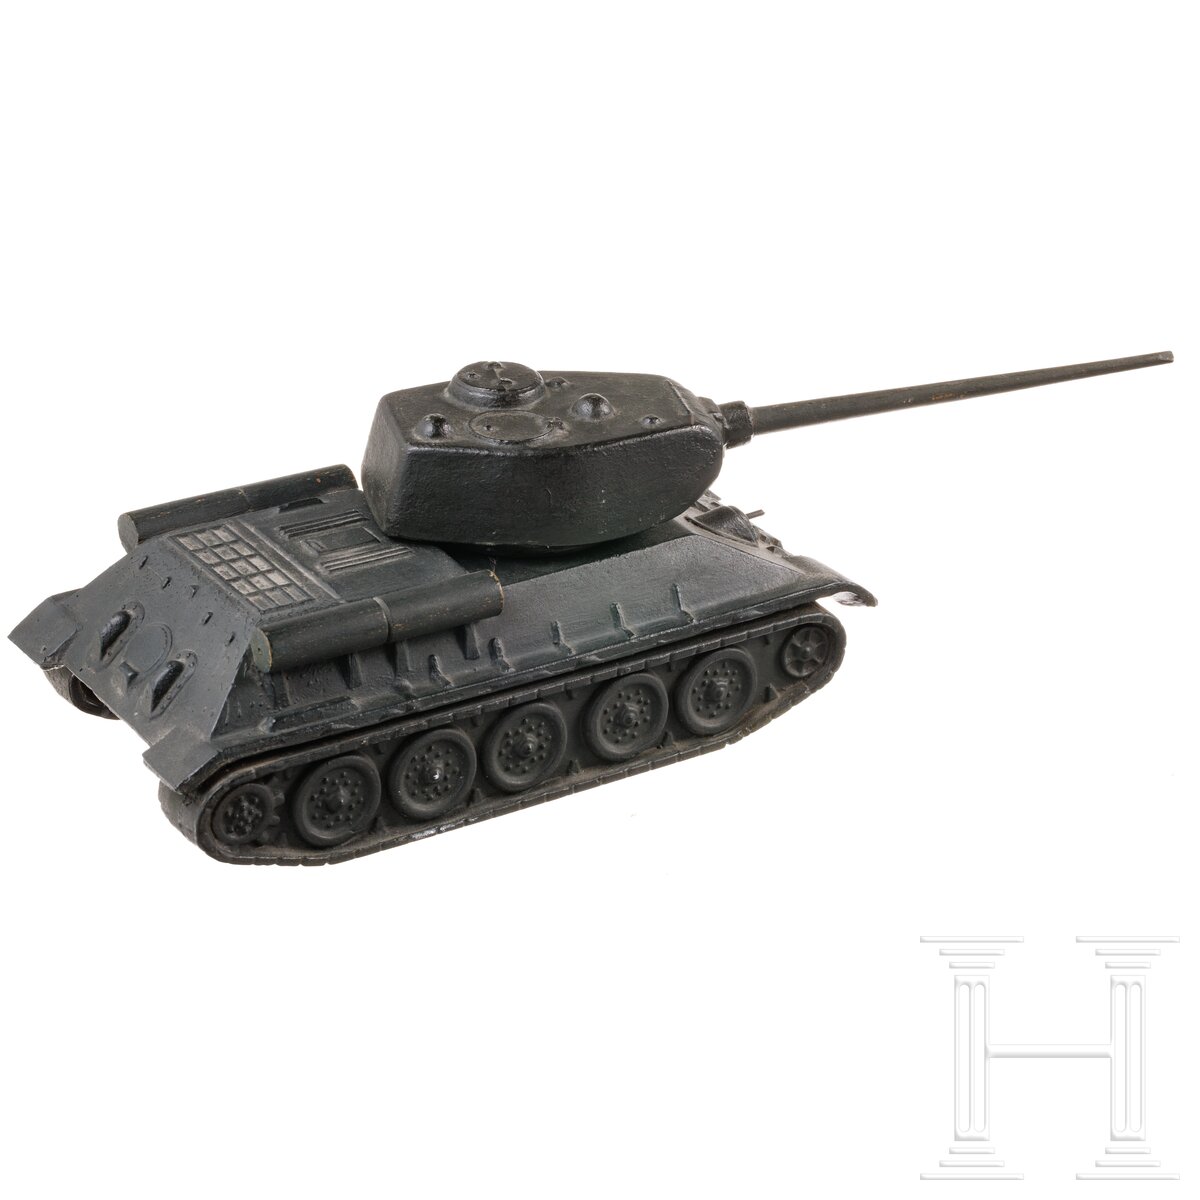 Modell eines T 34 - Image 2 of 3